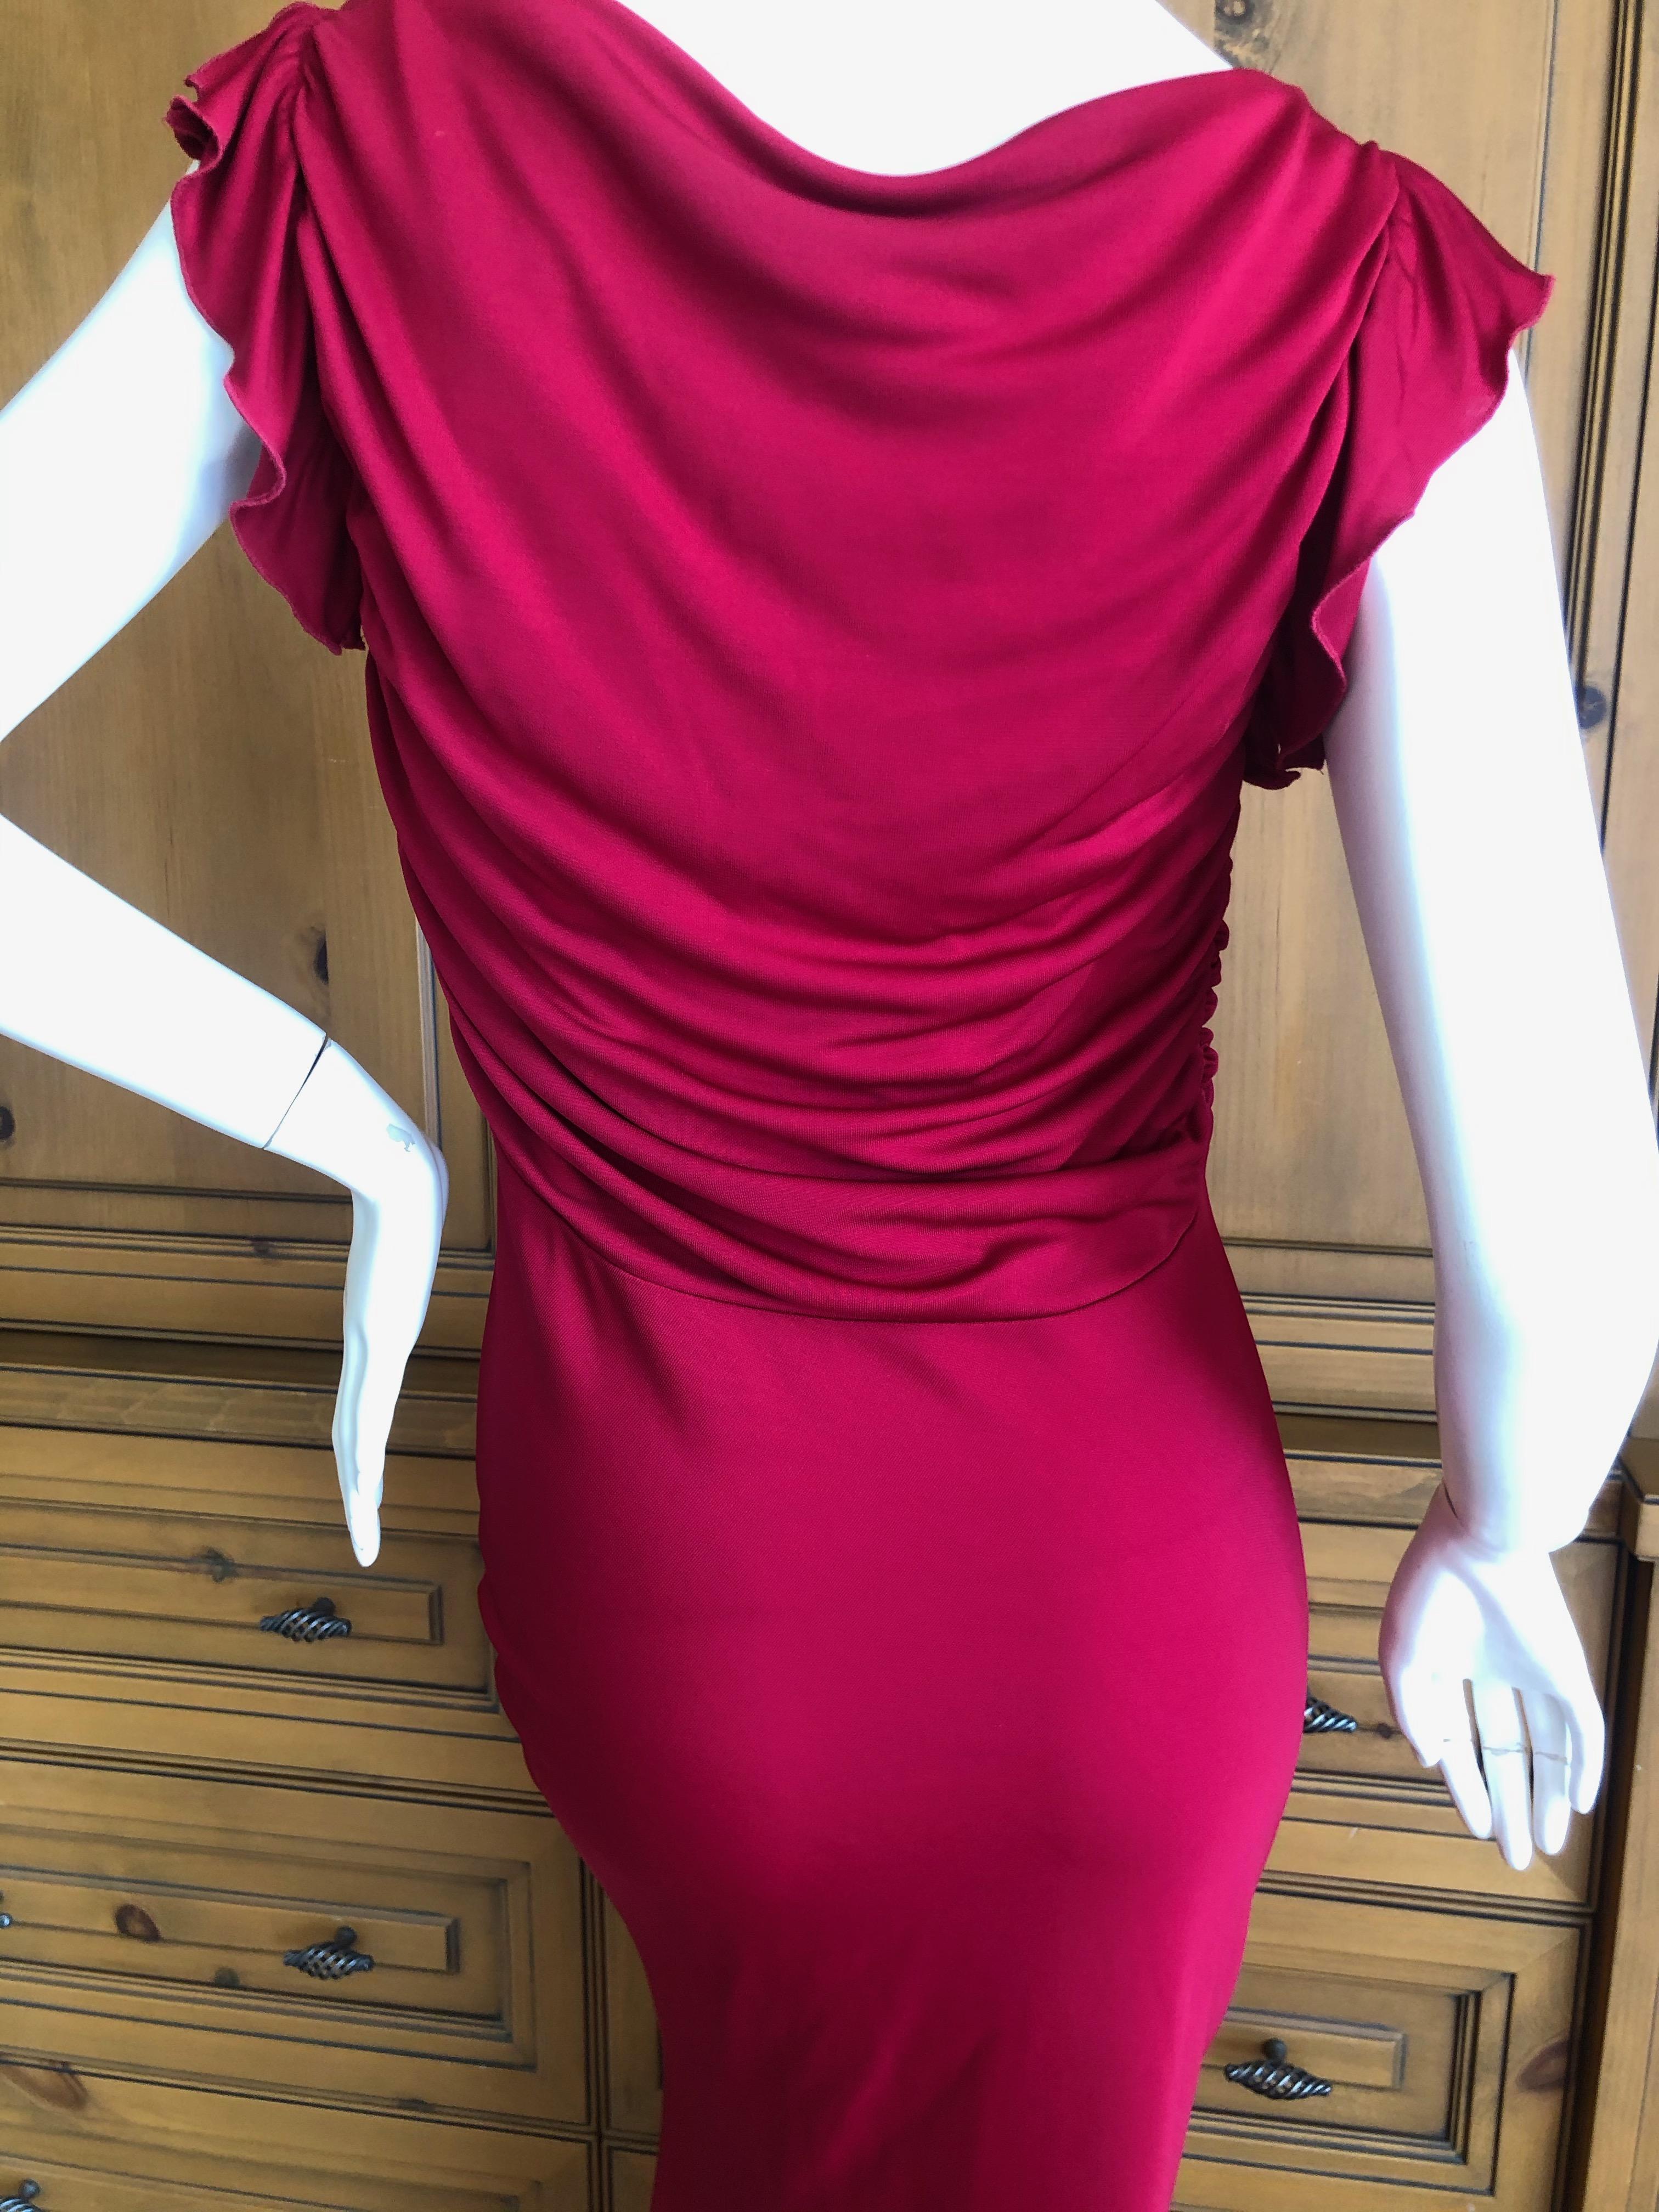   John Galliano Vintage Bias Cut Red Evening Dress with Keyhole Details For Sale 4